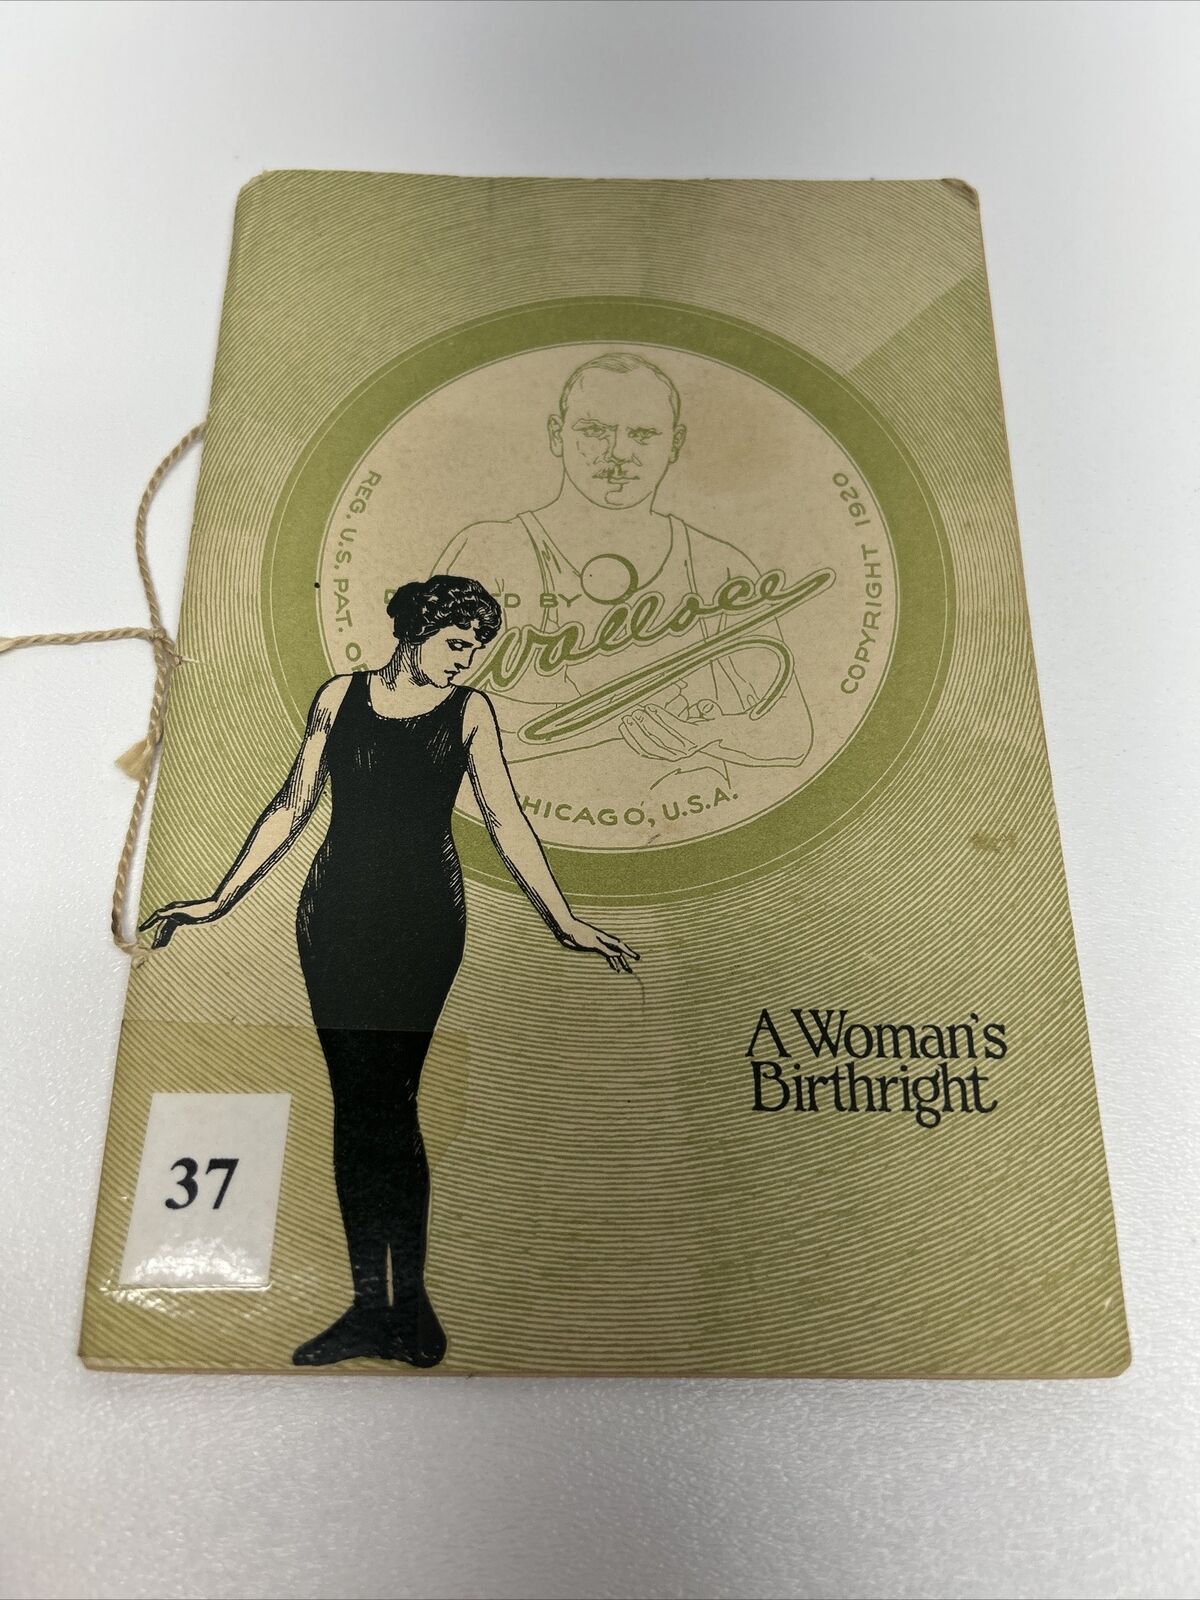 A Woman’s Birthright, WALLACE INSTITUTE 1920 WEIGHT LOSS & CONTROL Booklet